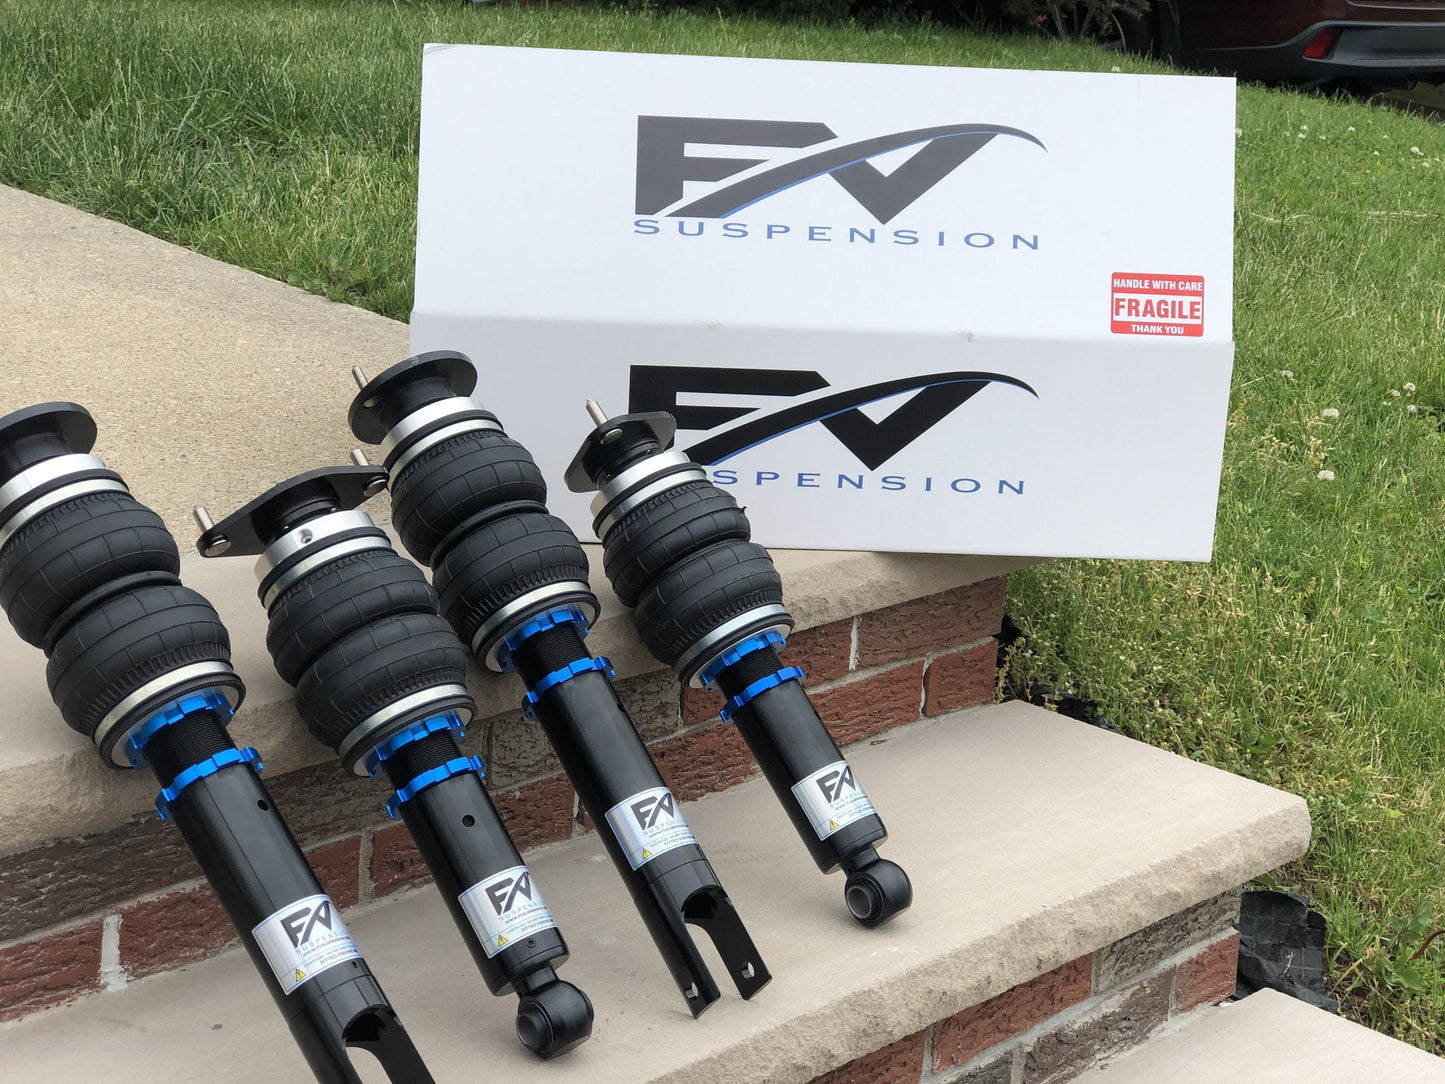 FV Suspension Tier 1 Budget kit Complete Air Ride kit for 11-17 Audi RS6 Avent Quattro AWD - FVALFullkit59